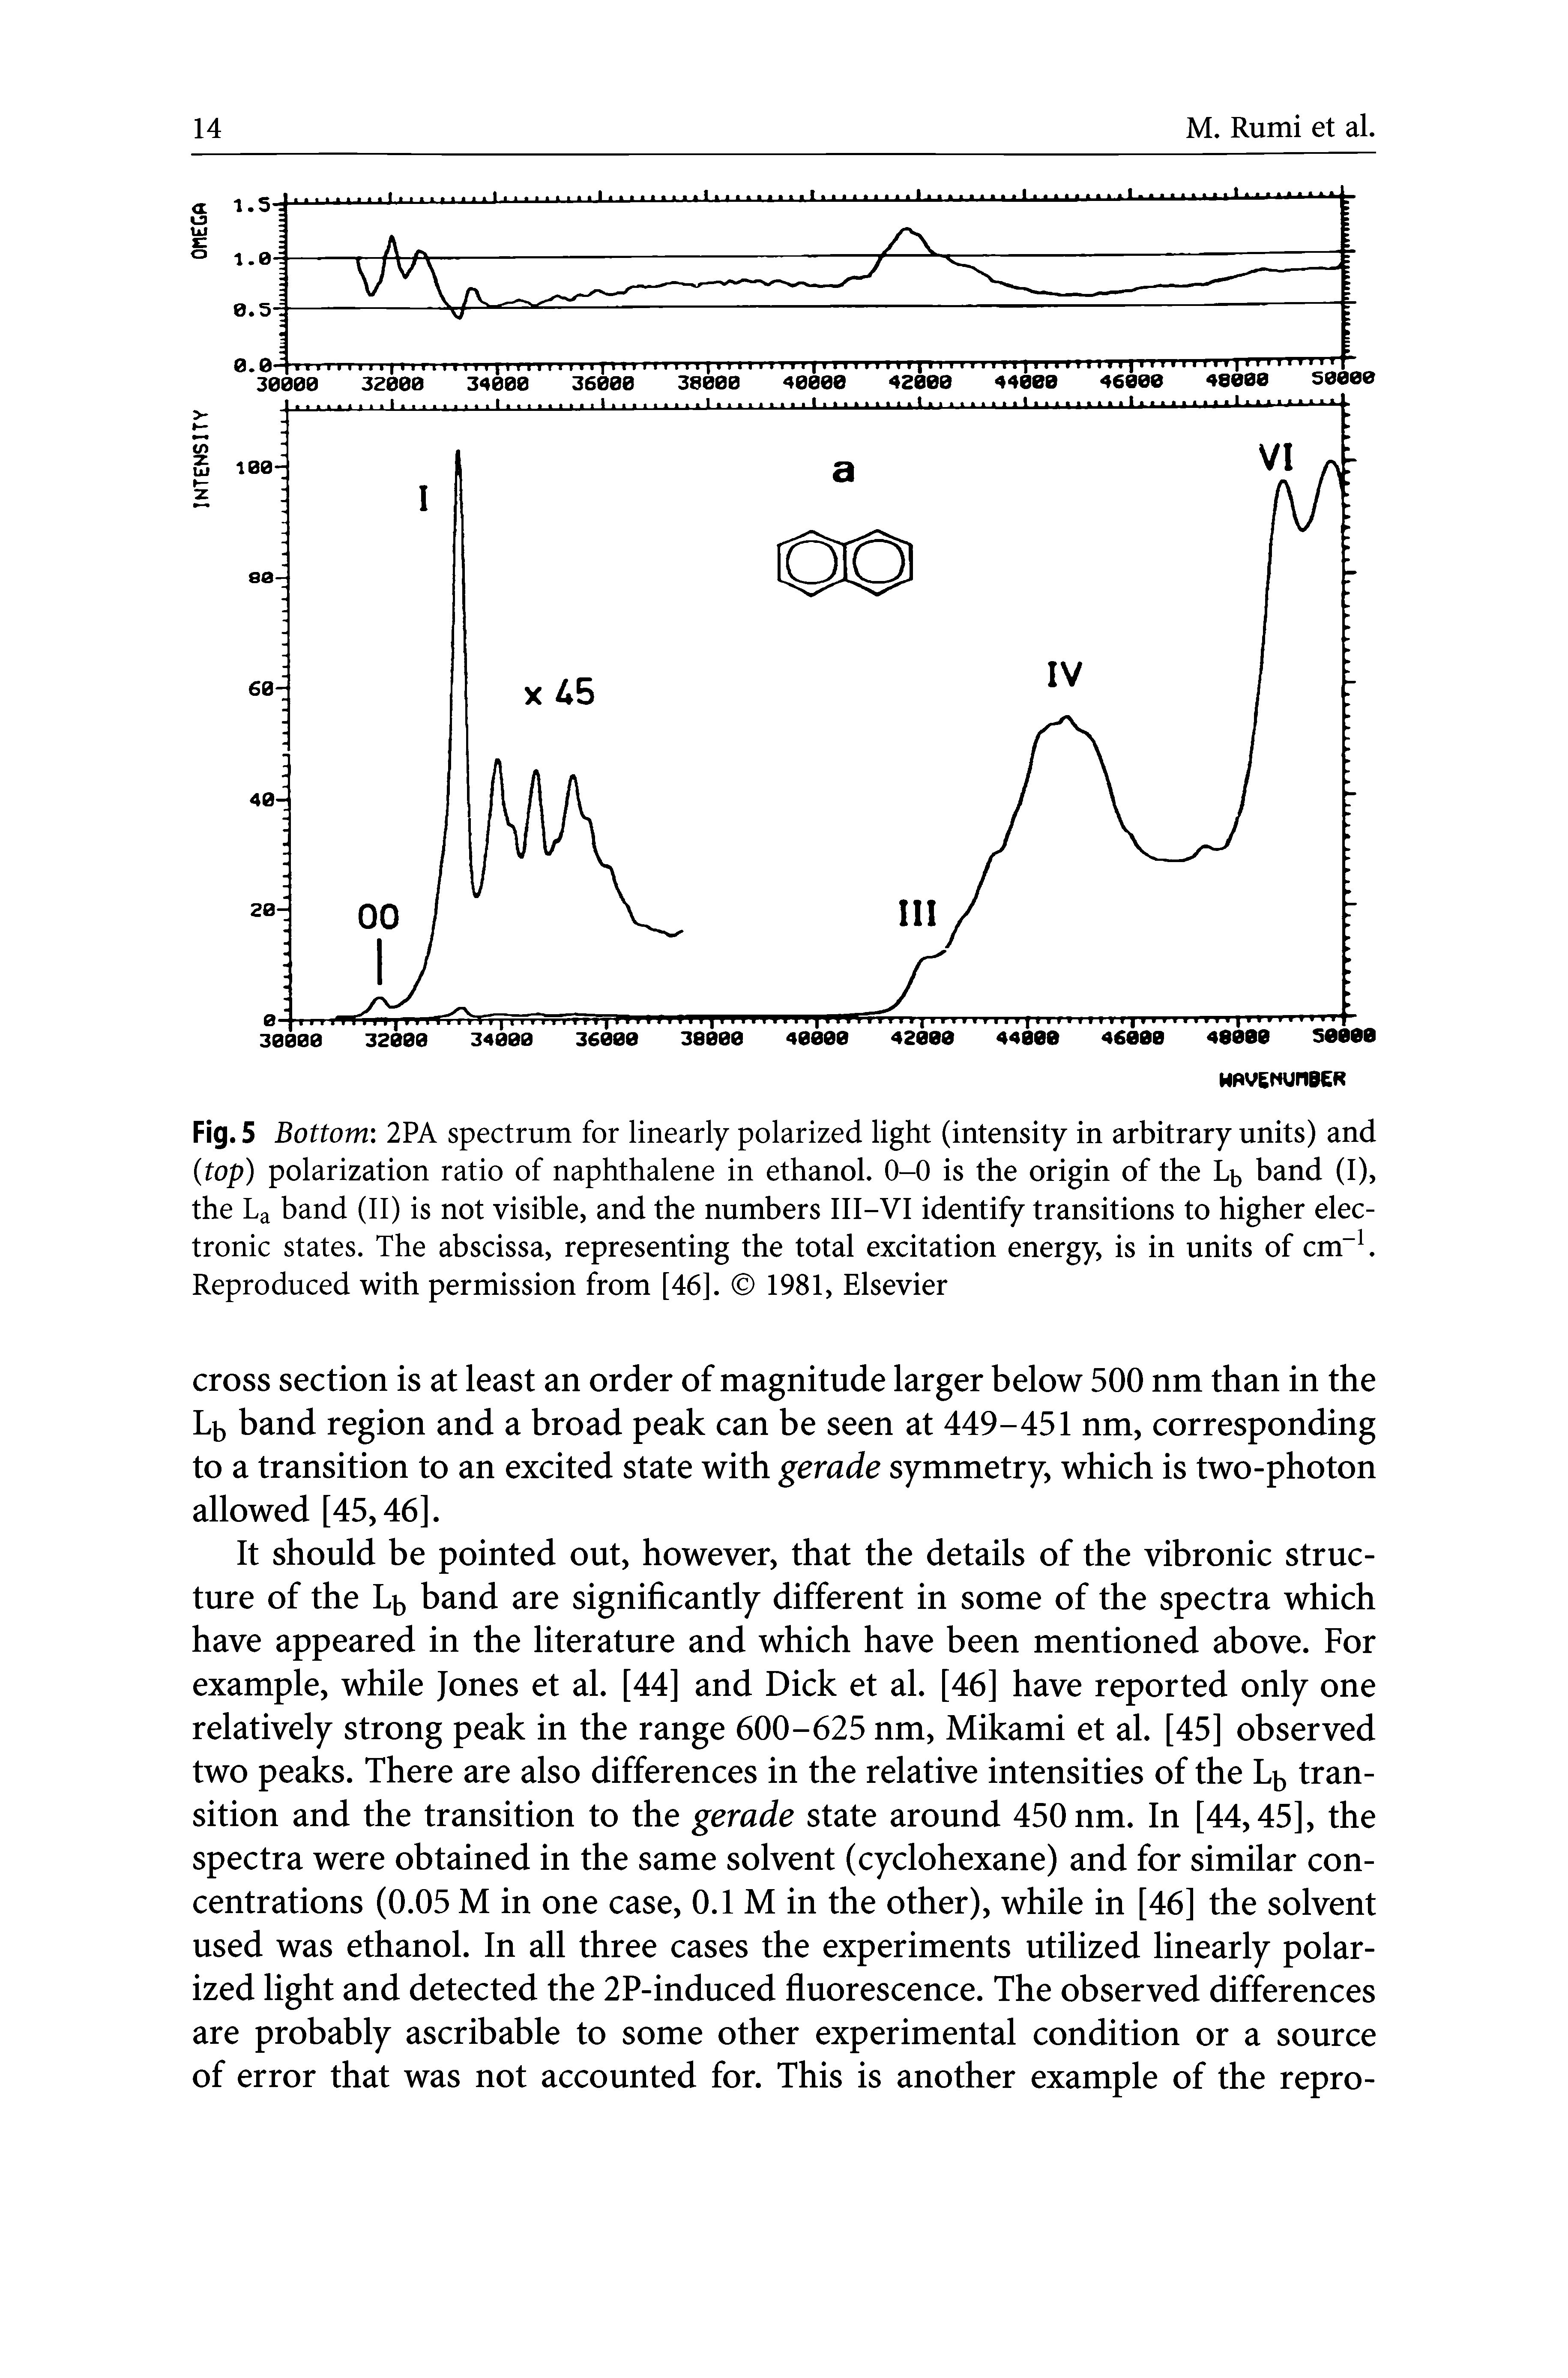 Fig. 5 Bottom 2PA spectrum for linearly polarized light (intensity in arbitrary units) and (top) polarization ratio of naphthalene in ethanol. 0-0 is the origin of the band (I), the La band (II) is not visible, and the numbers III-VI identify transitions to higher electronic states. The abscissa, representing the total excitation energy, is in units of cm". Reproduced with permission from [46]. 1981, Elsevier...